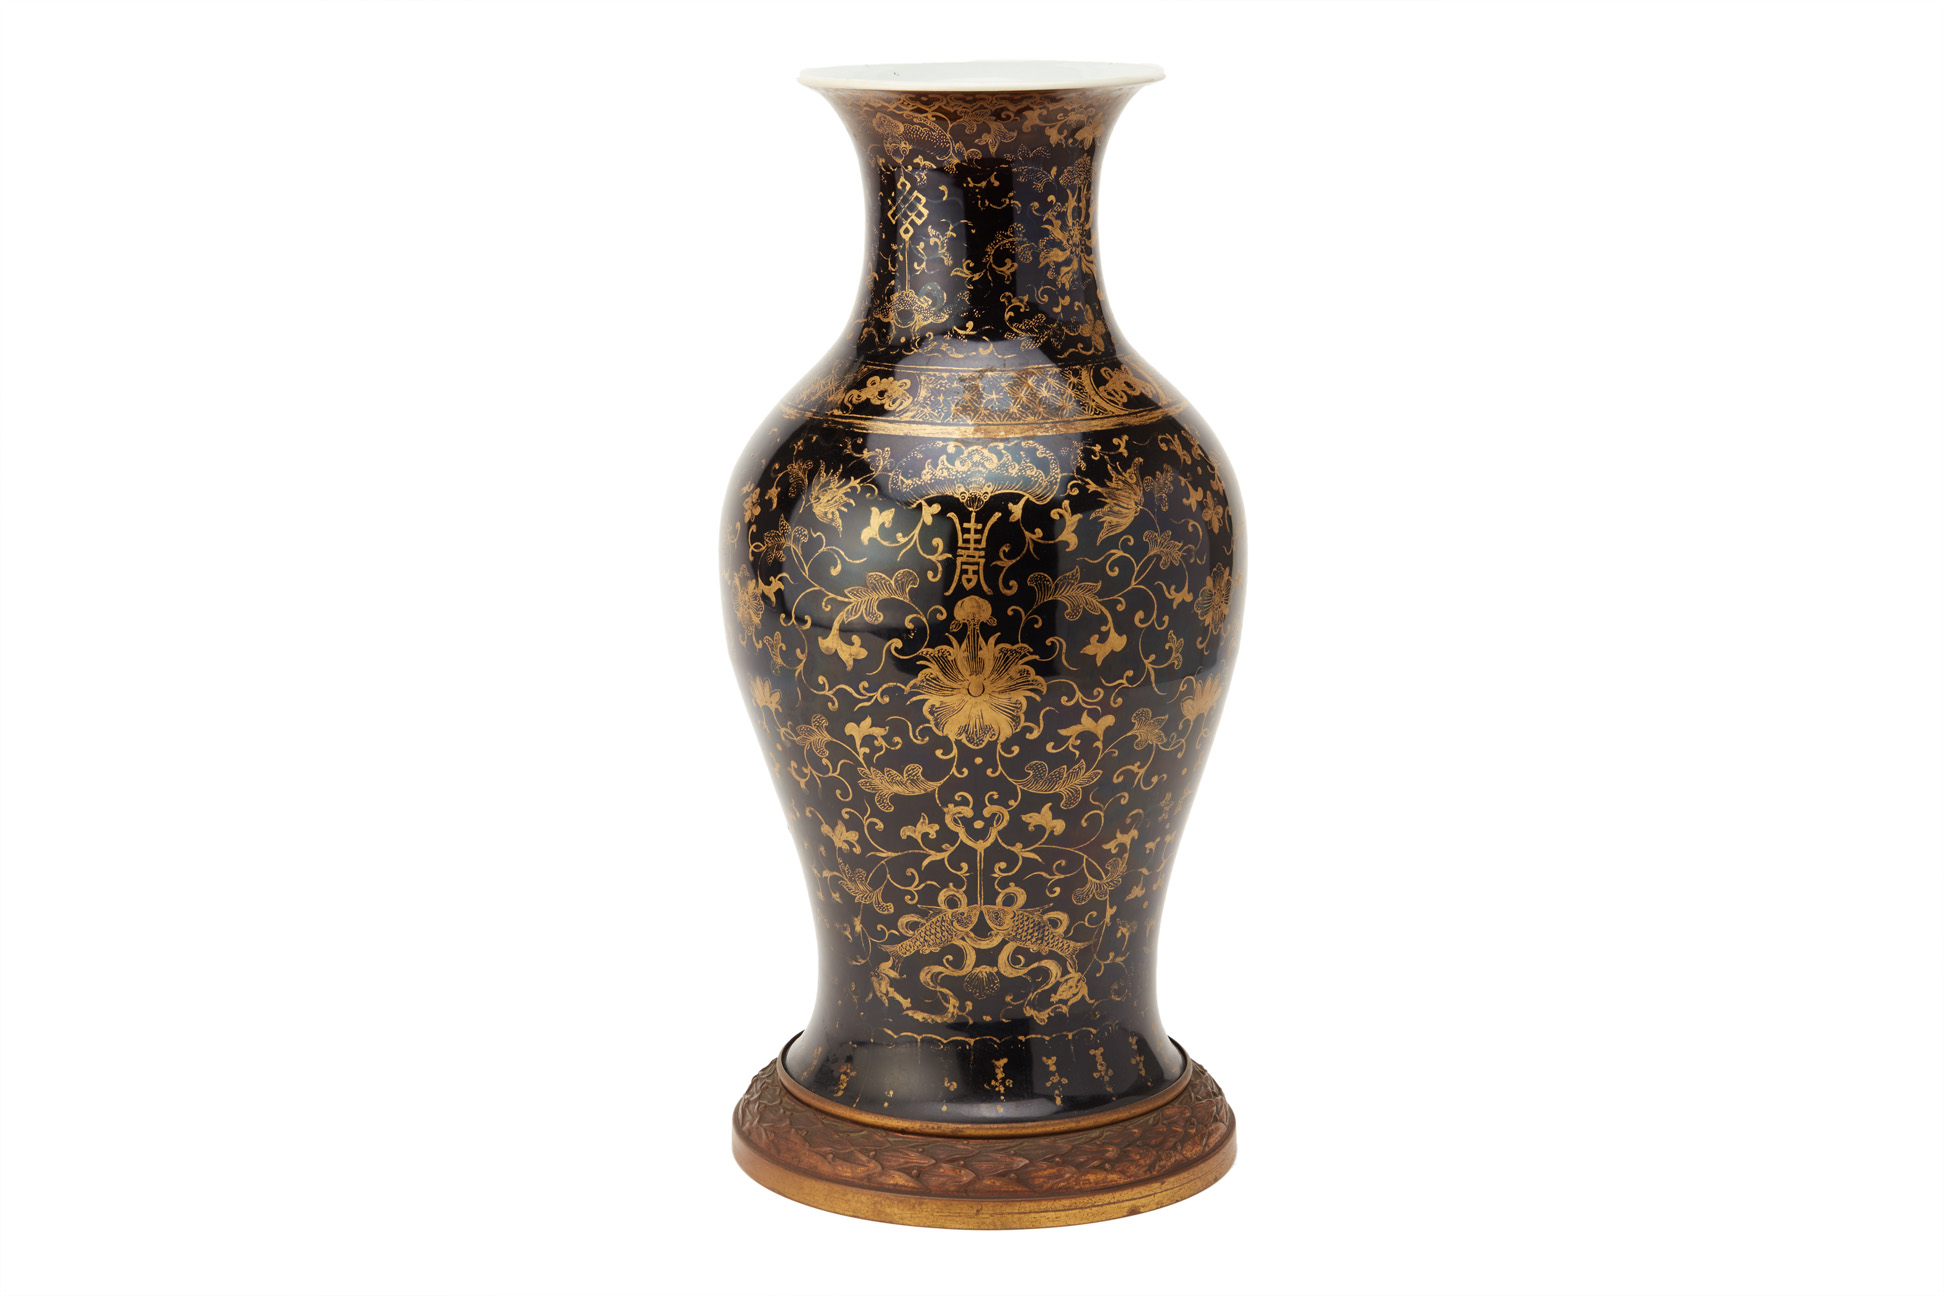 A MIRROR BLACK AND GILT DECORATED BALUSTER VASE